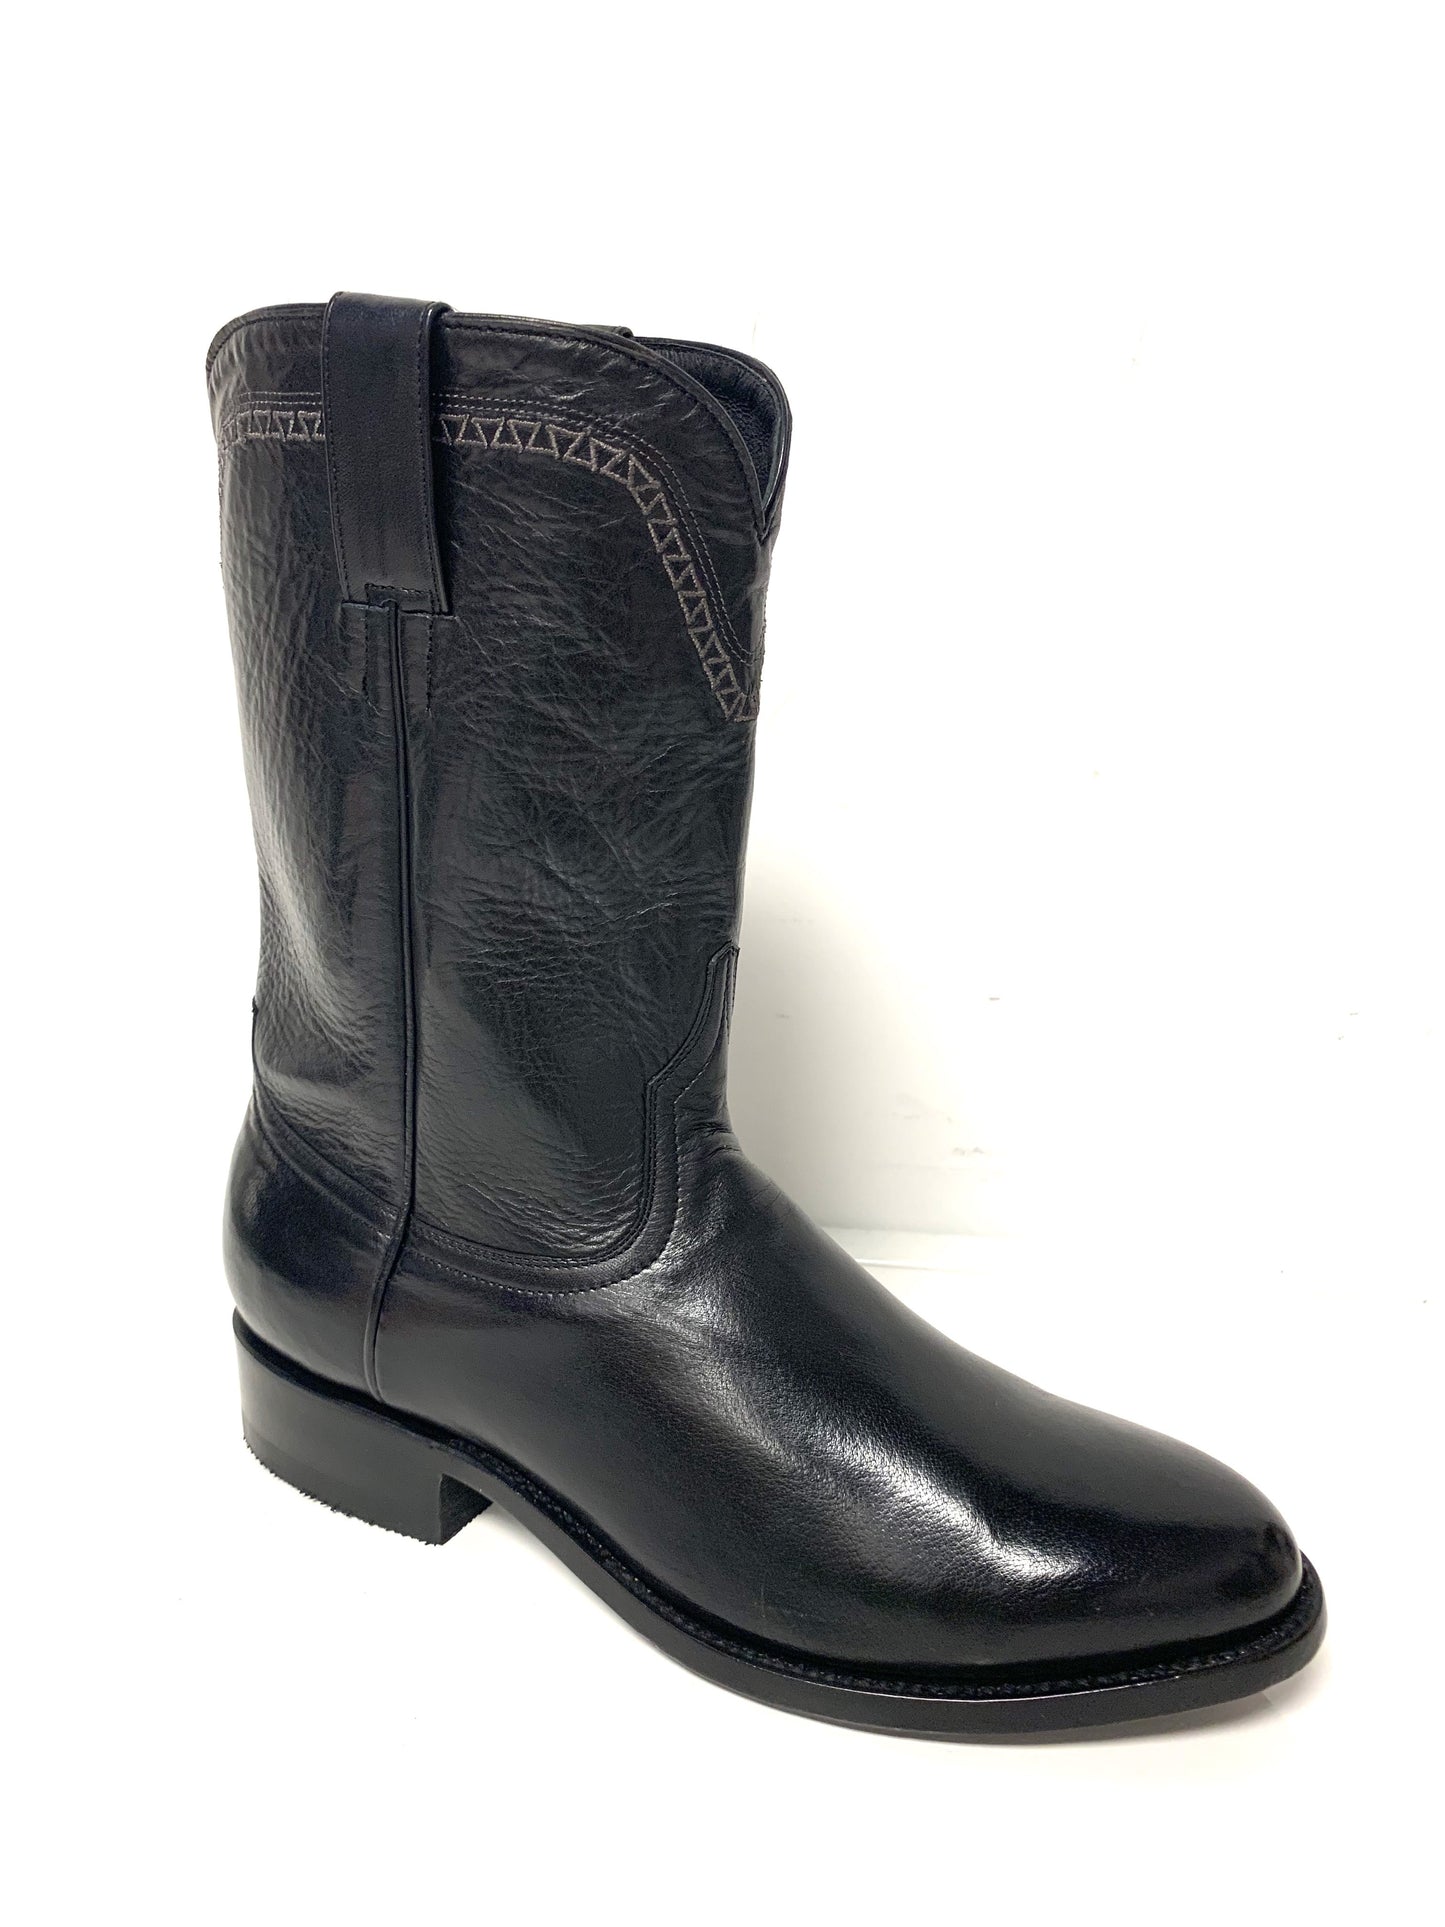 NOM006-2 Old Boot Factory Men's CHOCTAW Black Baby Buffalo Roper Boot